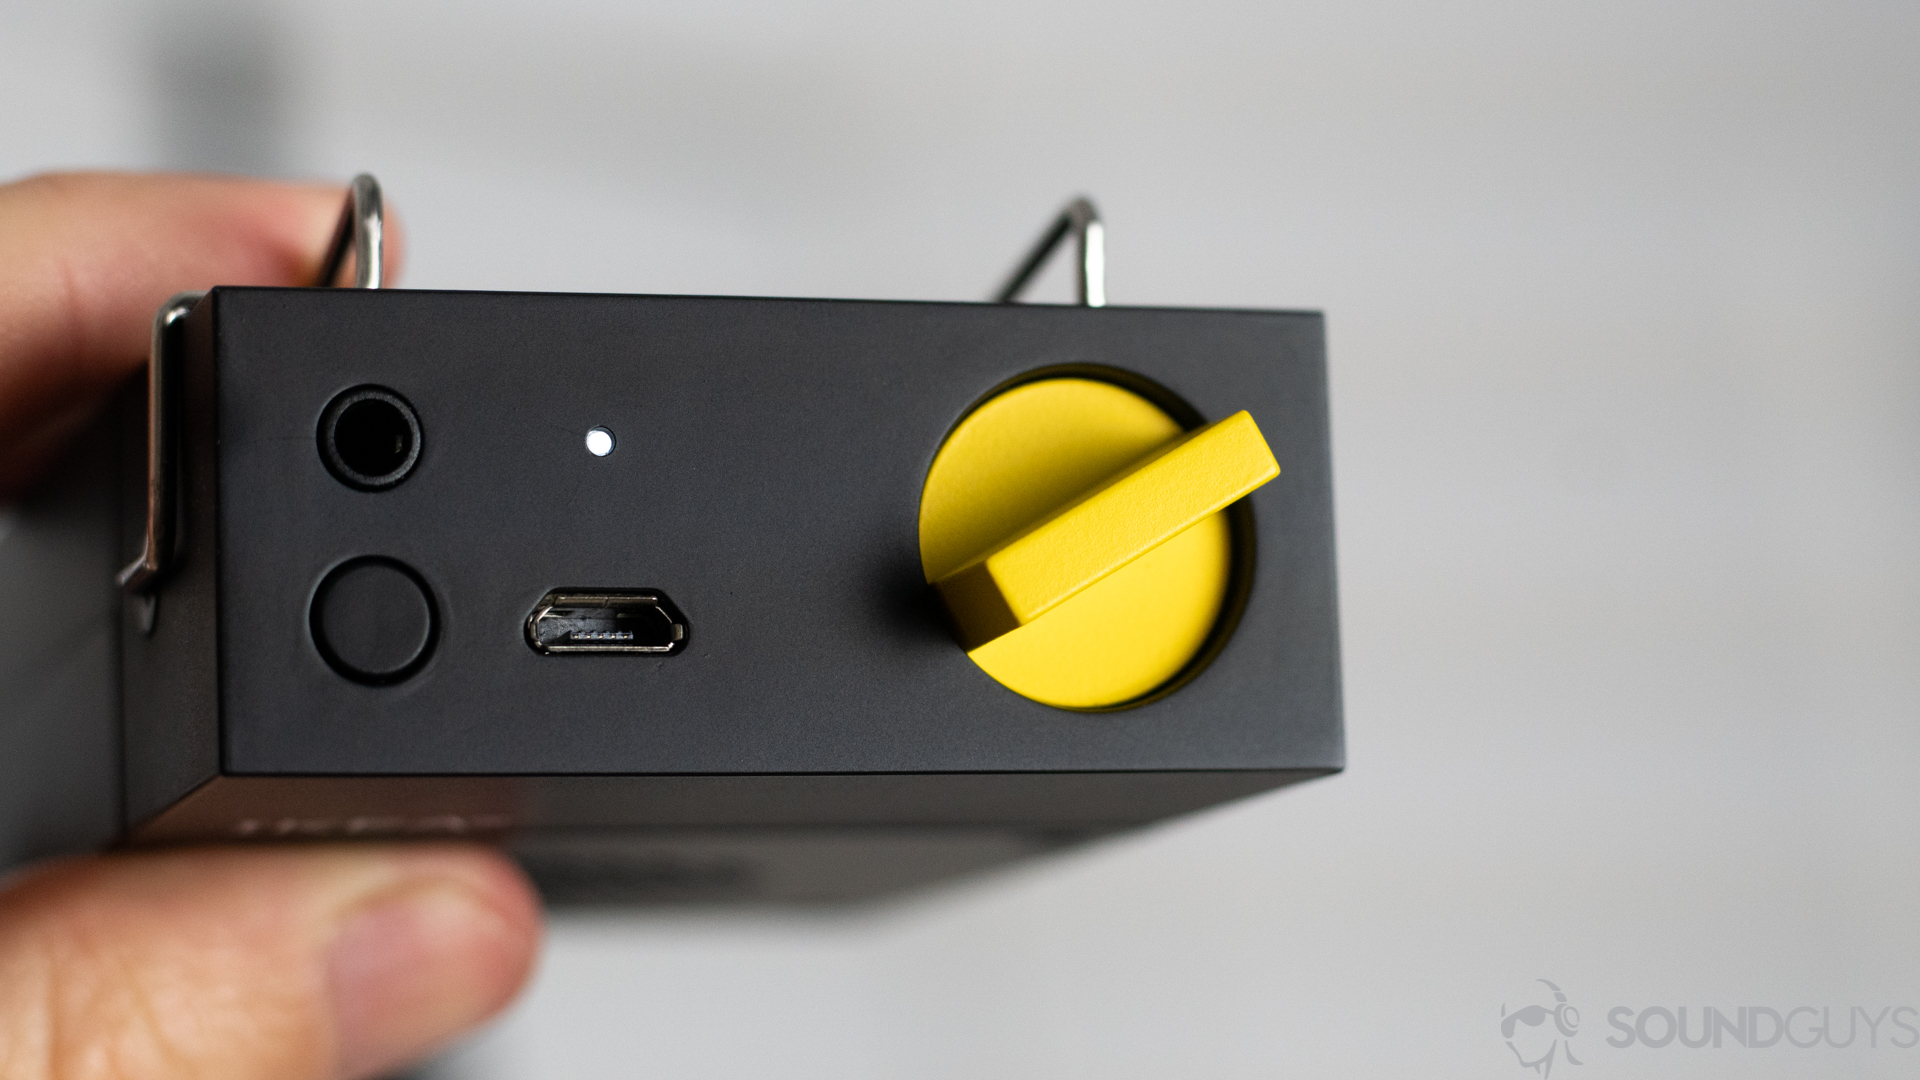 Pictured is the bright yellow volume volume button, 3.5mm input, and microUSB input of the Frekvens Portable speaker.